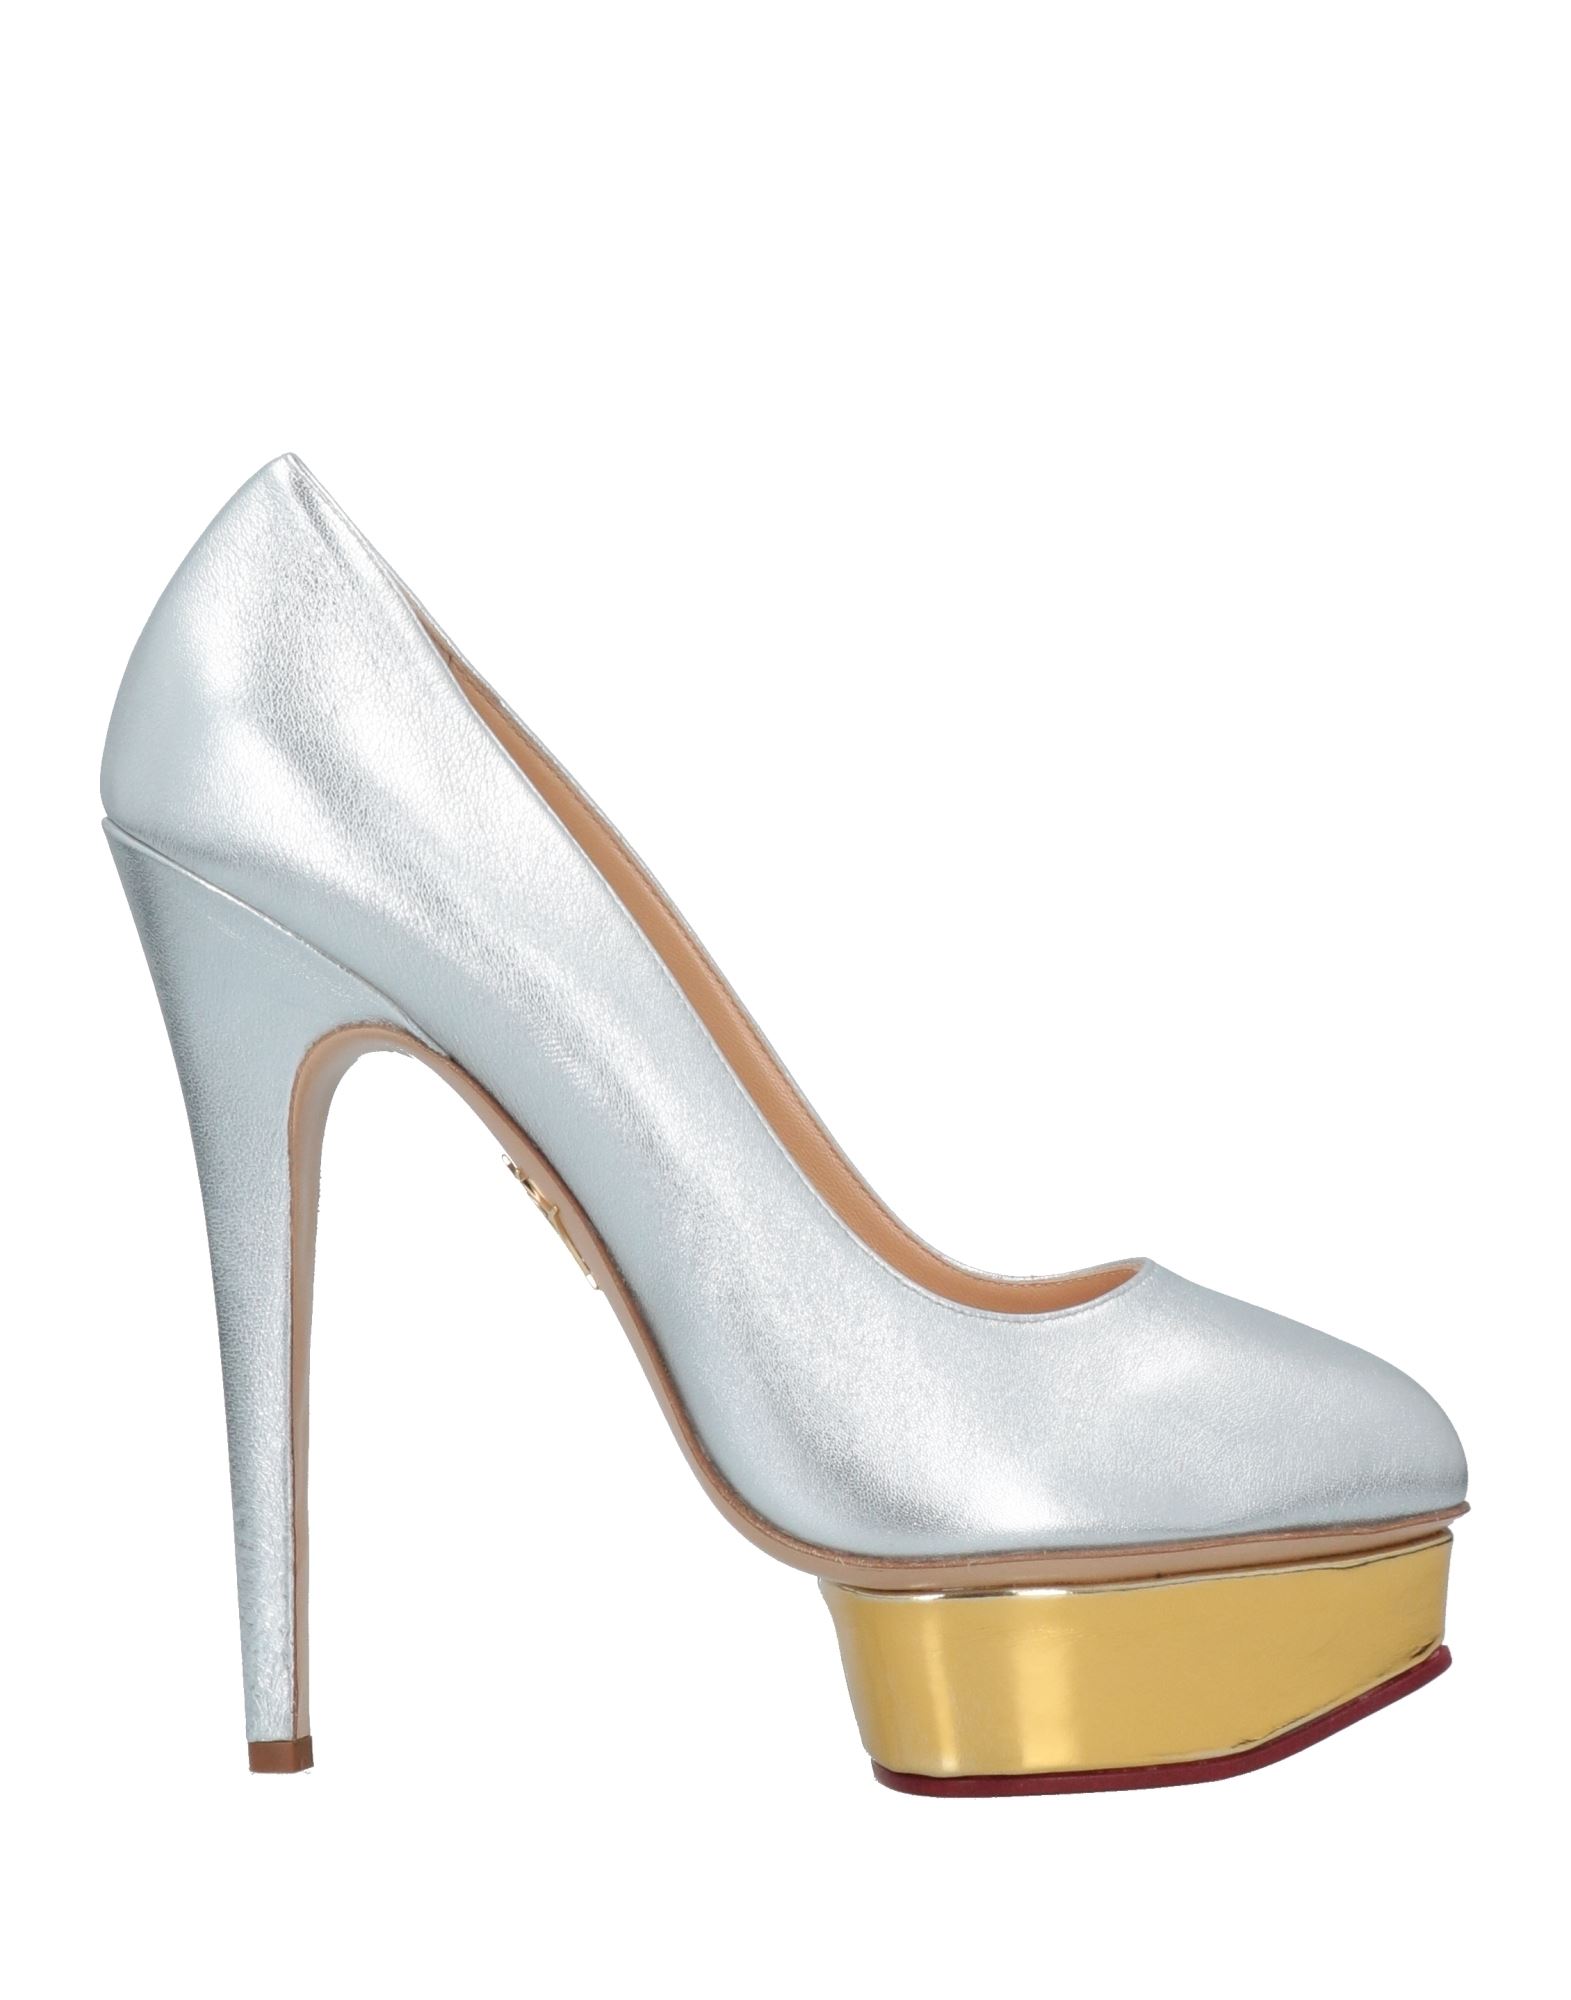 CHARLOTTE OLYMPIA PUMPS